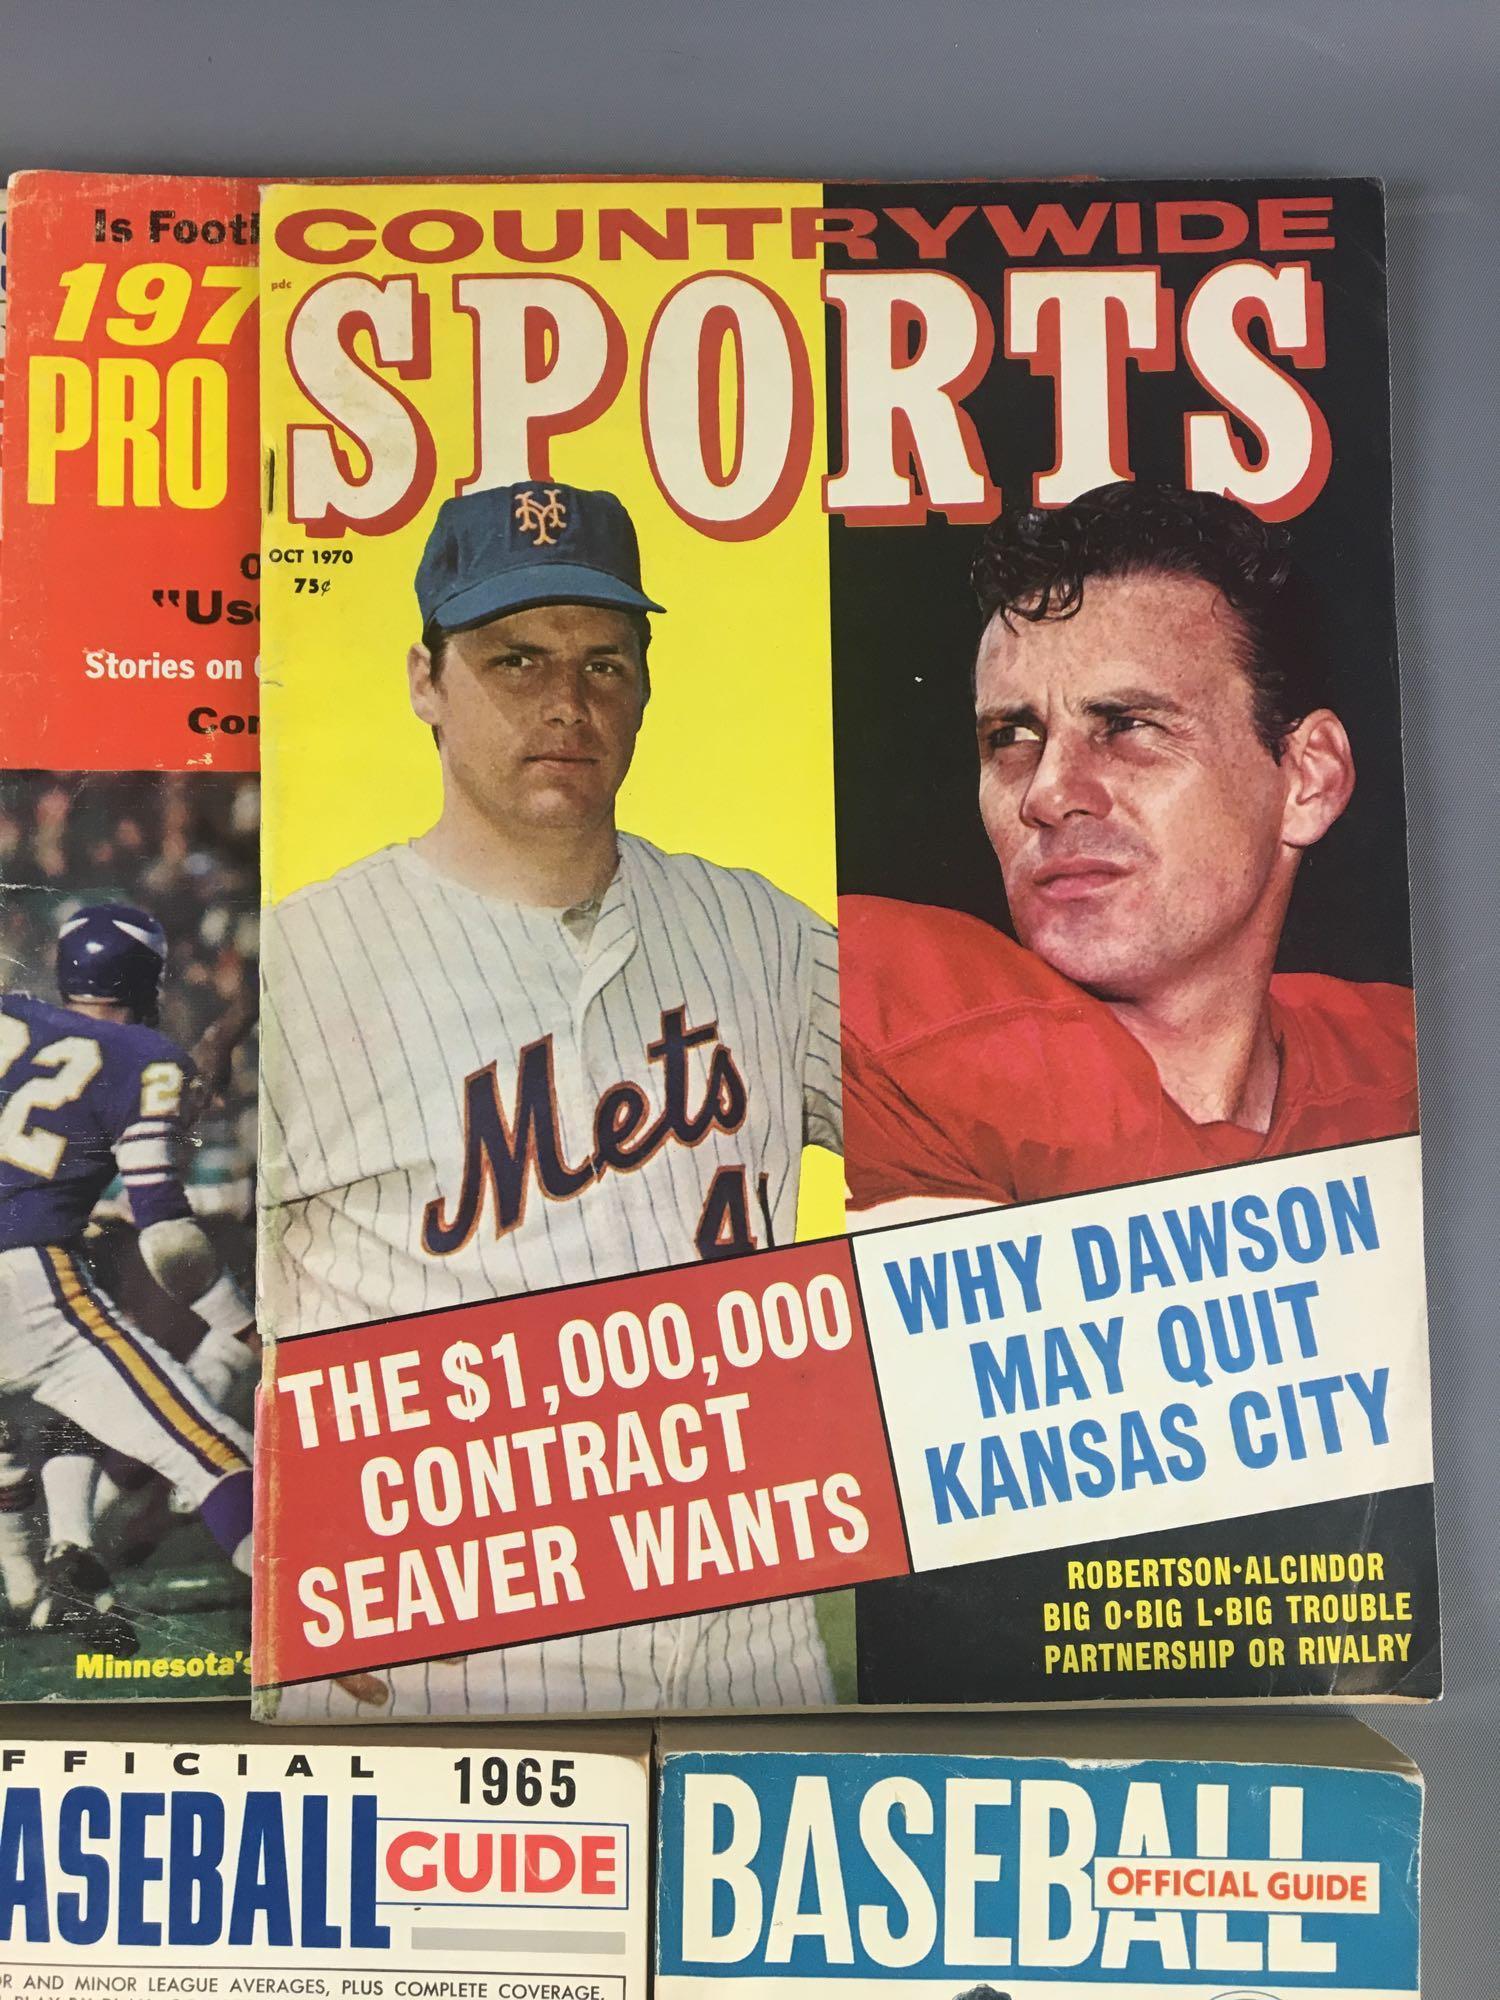 Group of Vintage Sports Magazines and Books